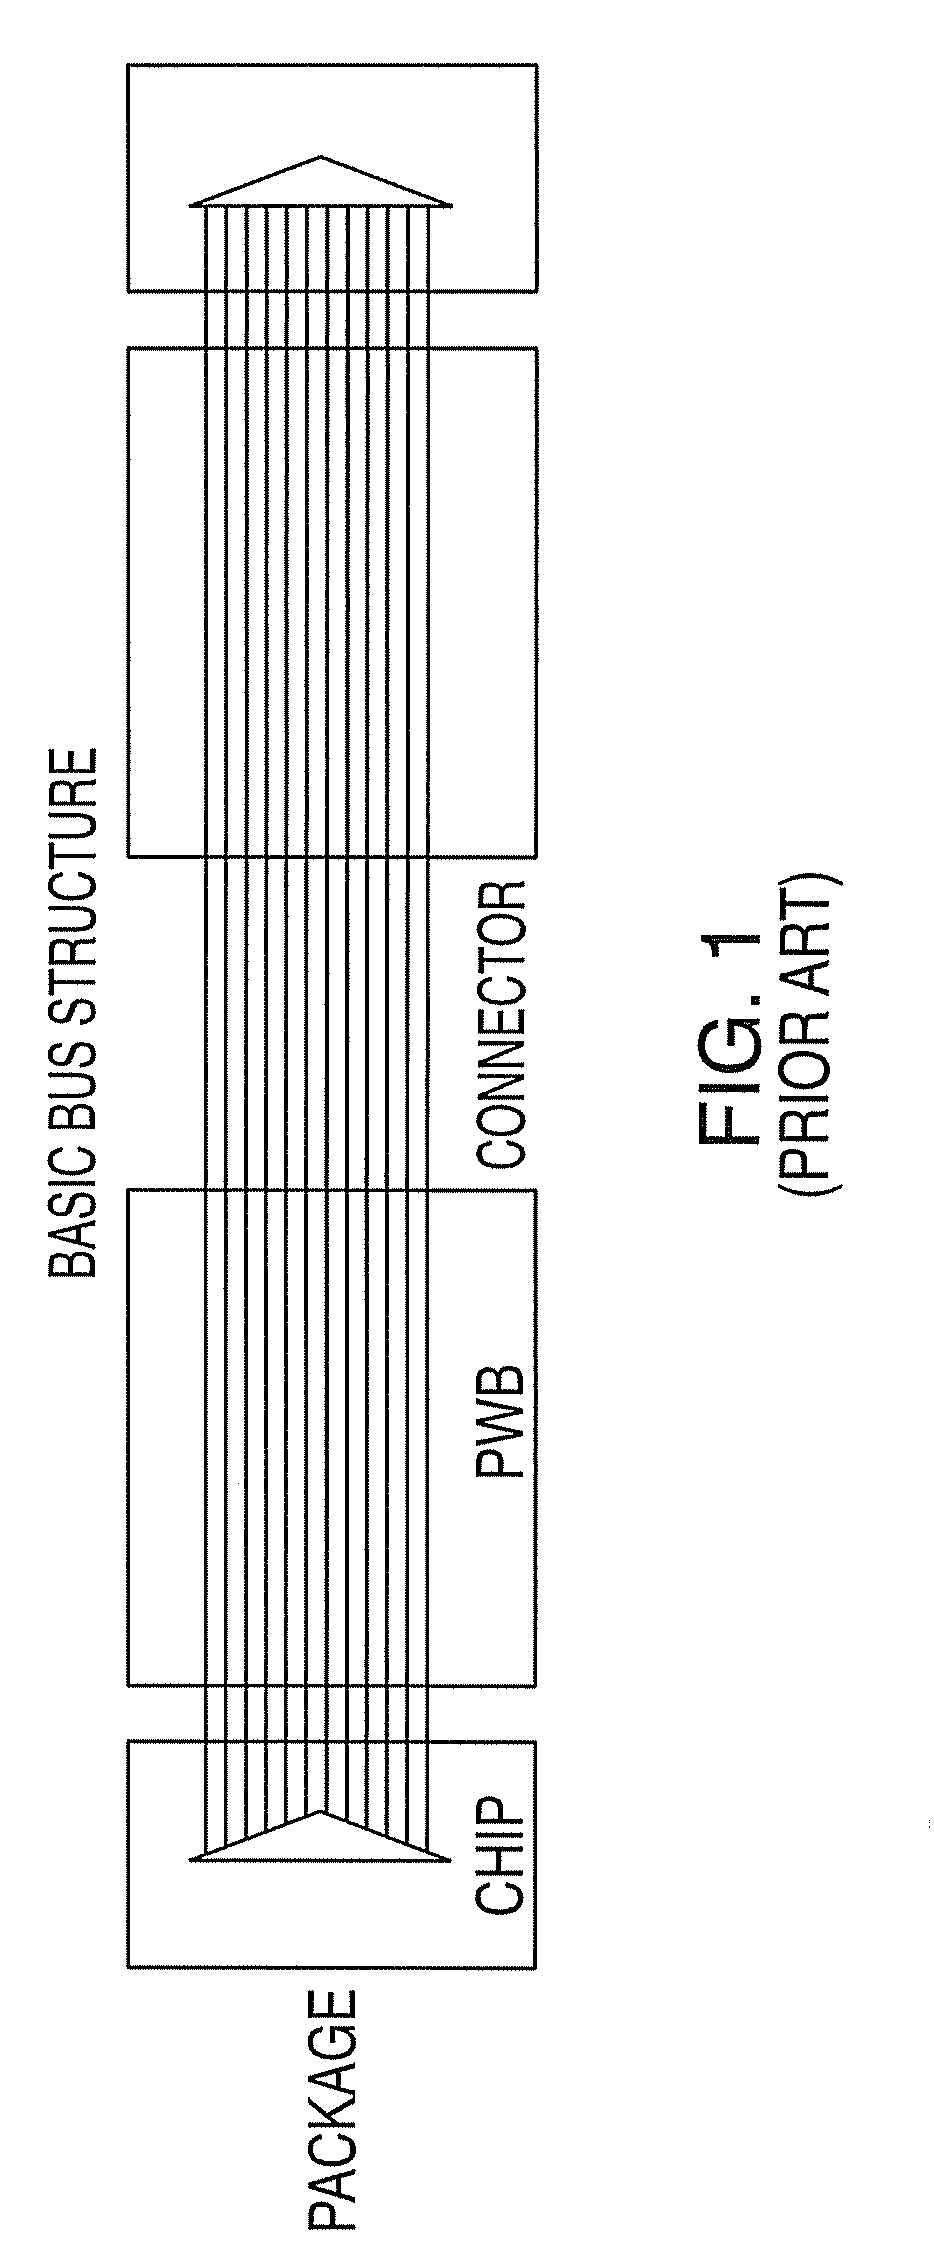 Systems, methods, and computer program products for providing a two-bit symbol bus error correcting code with all checkbits transferred last